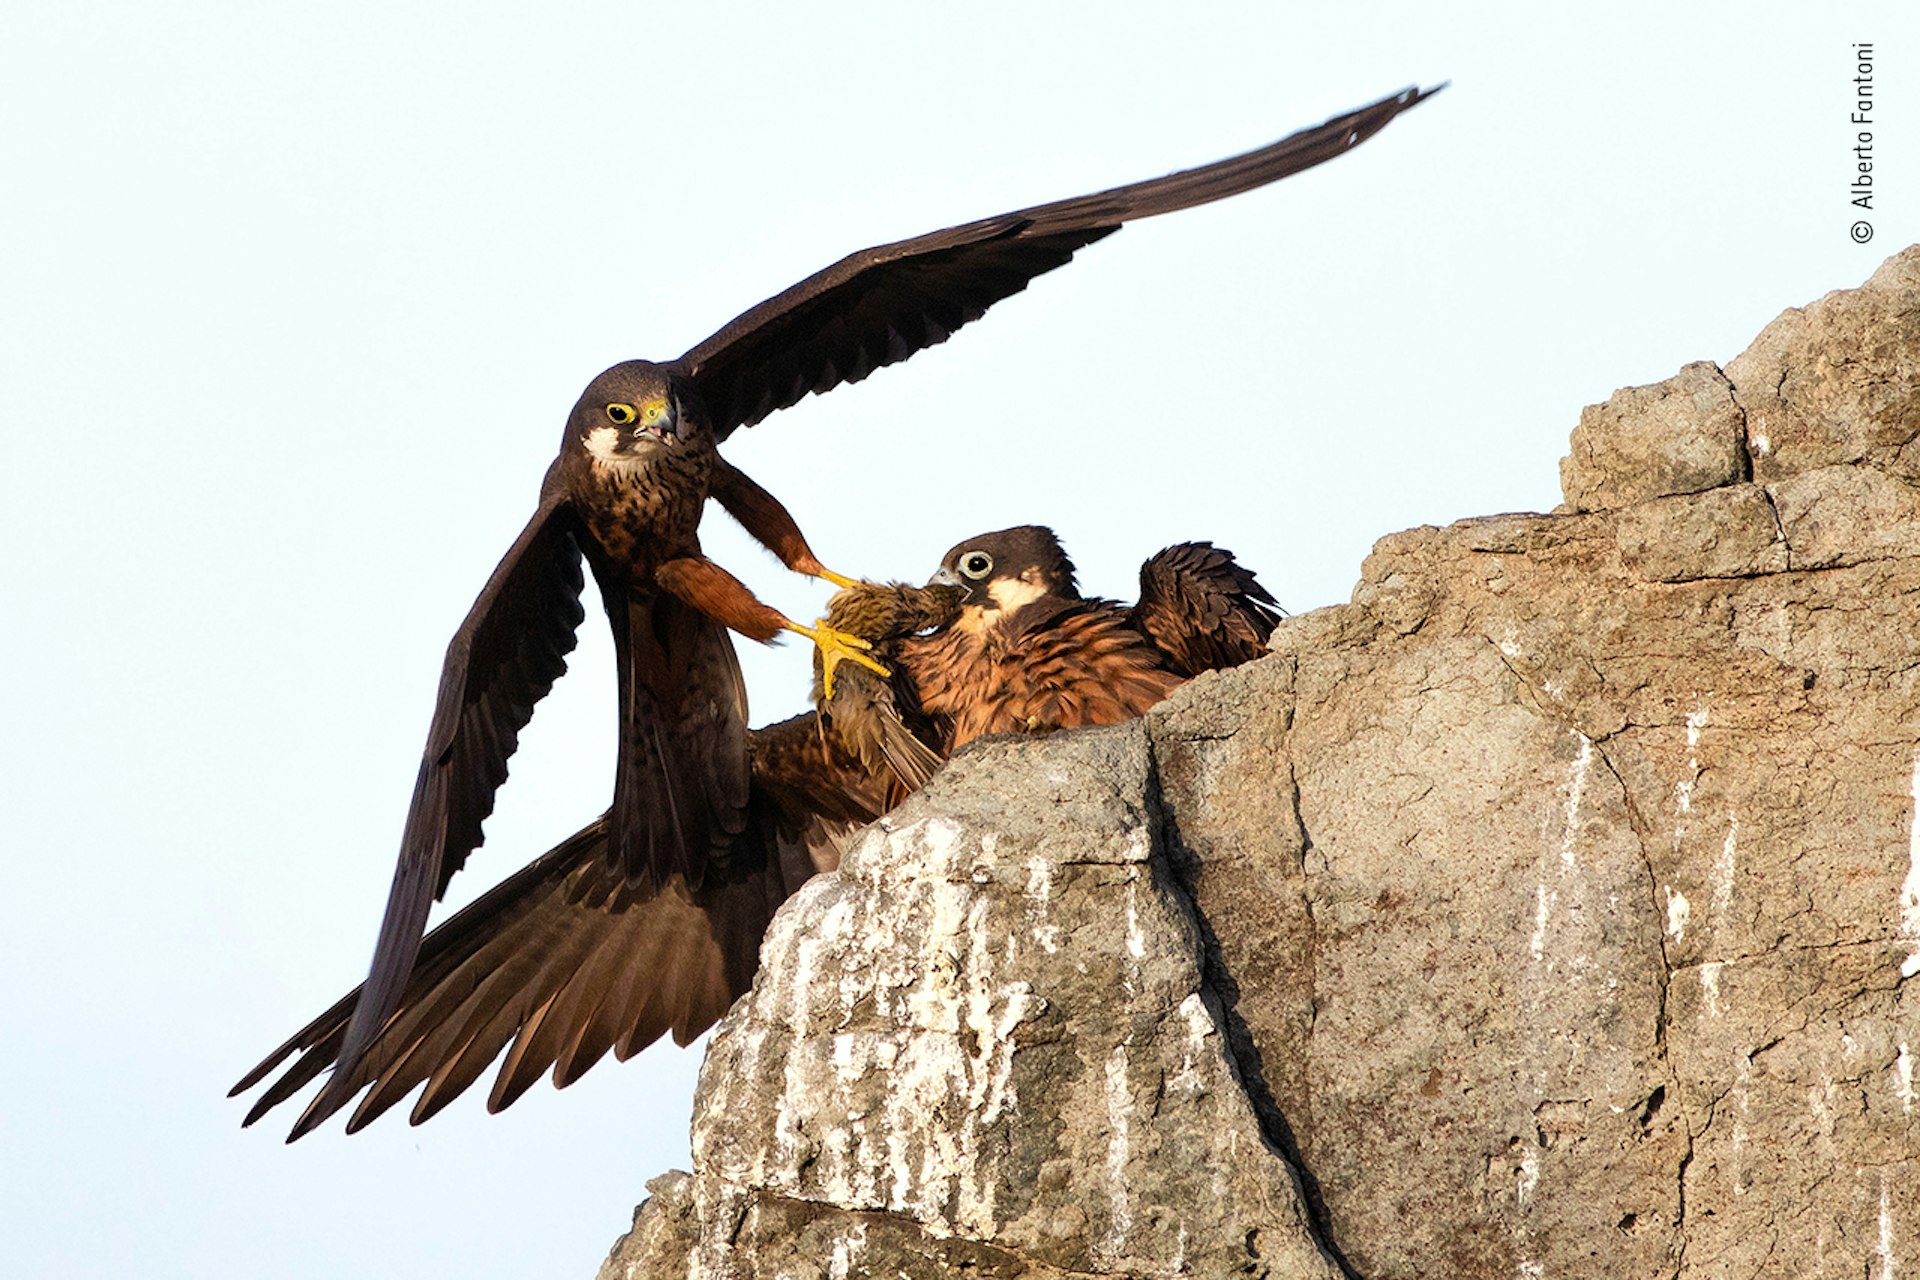 A male Eleonora’s falcon brings a bird to his mate minding the nest